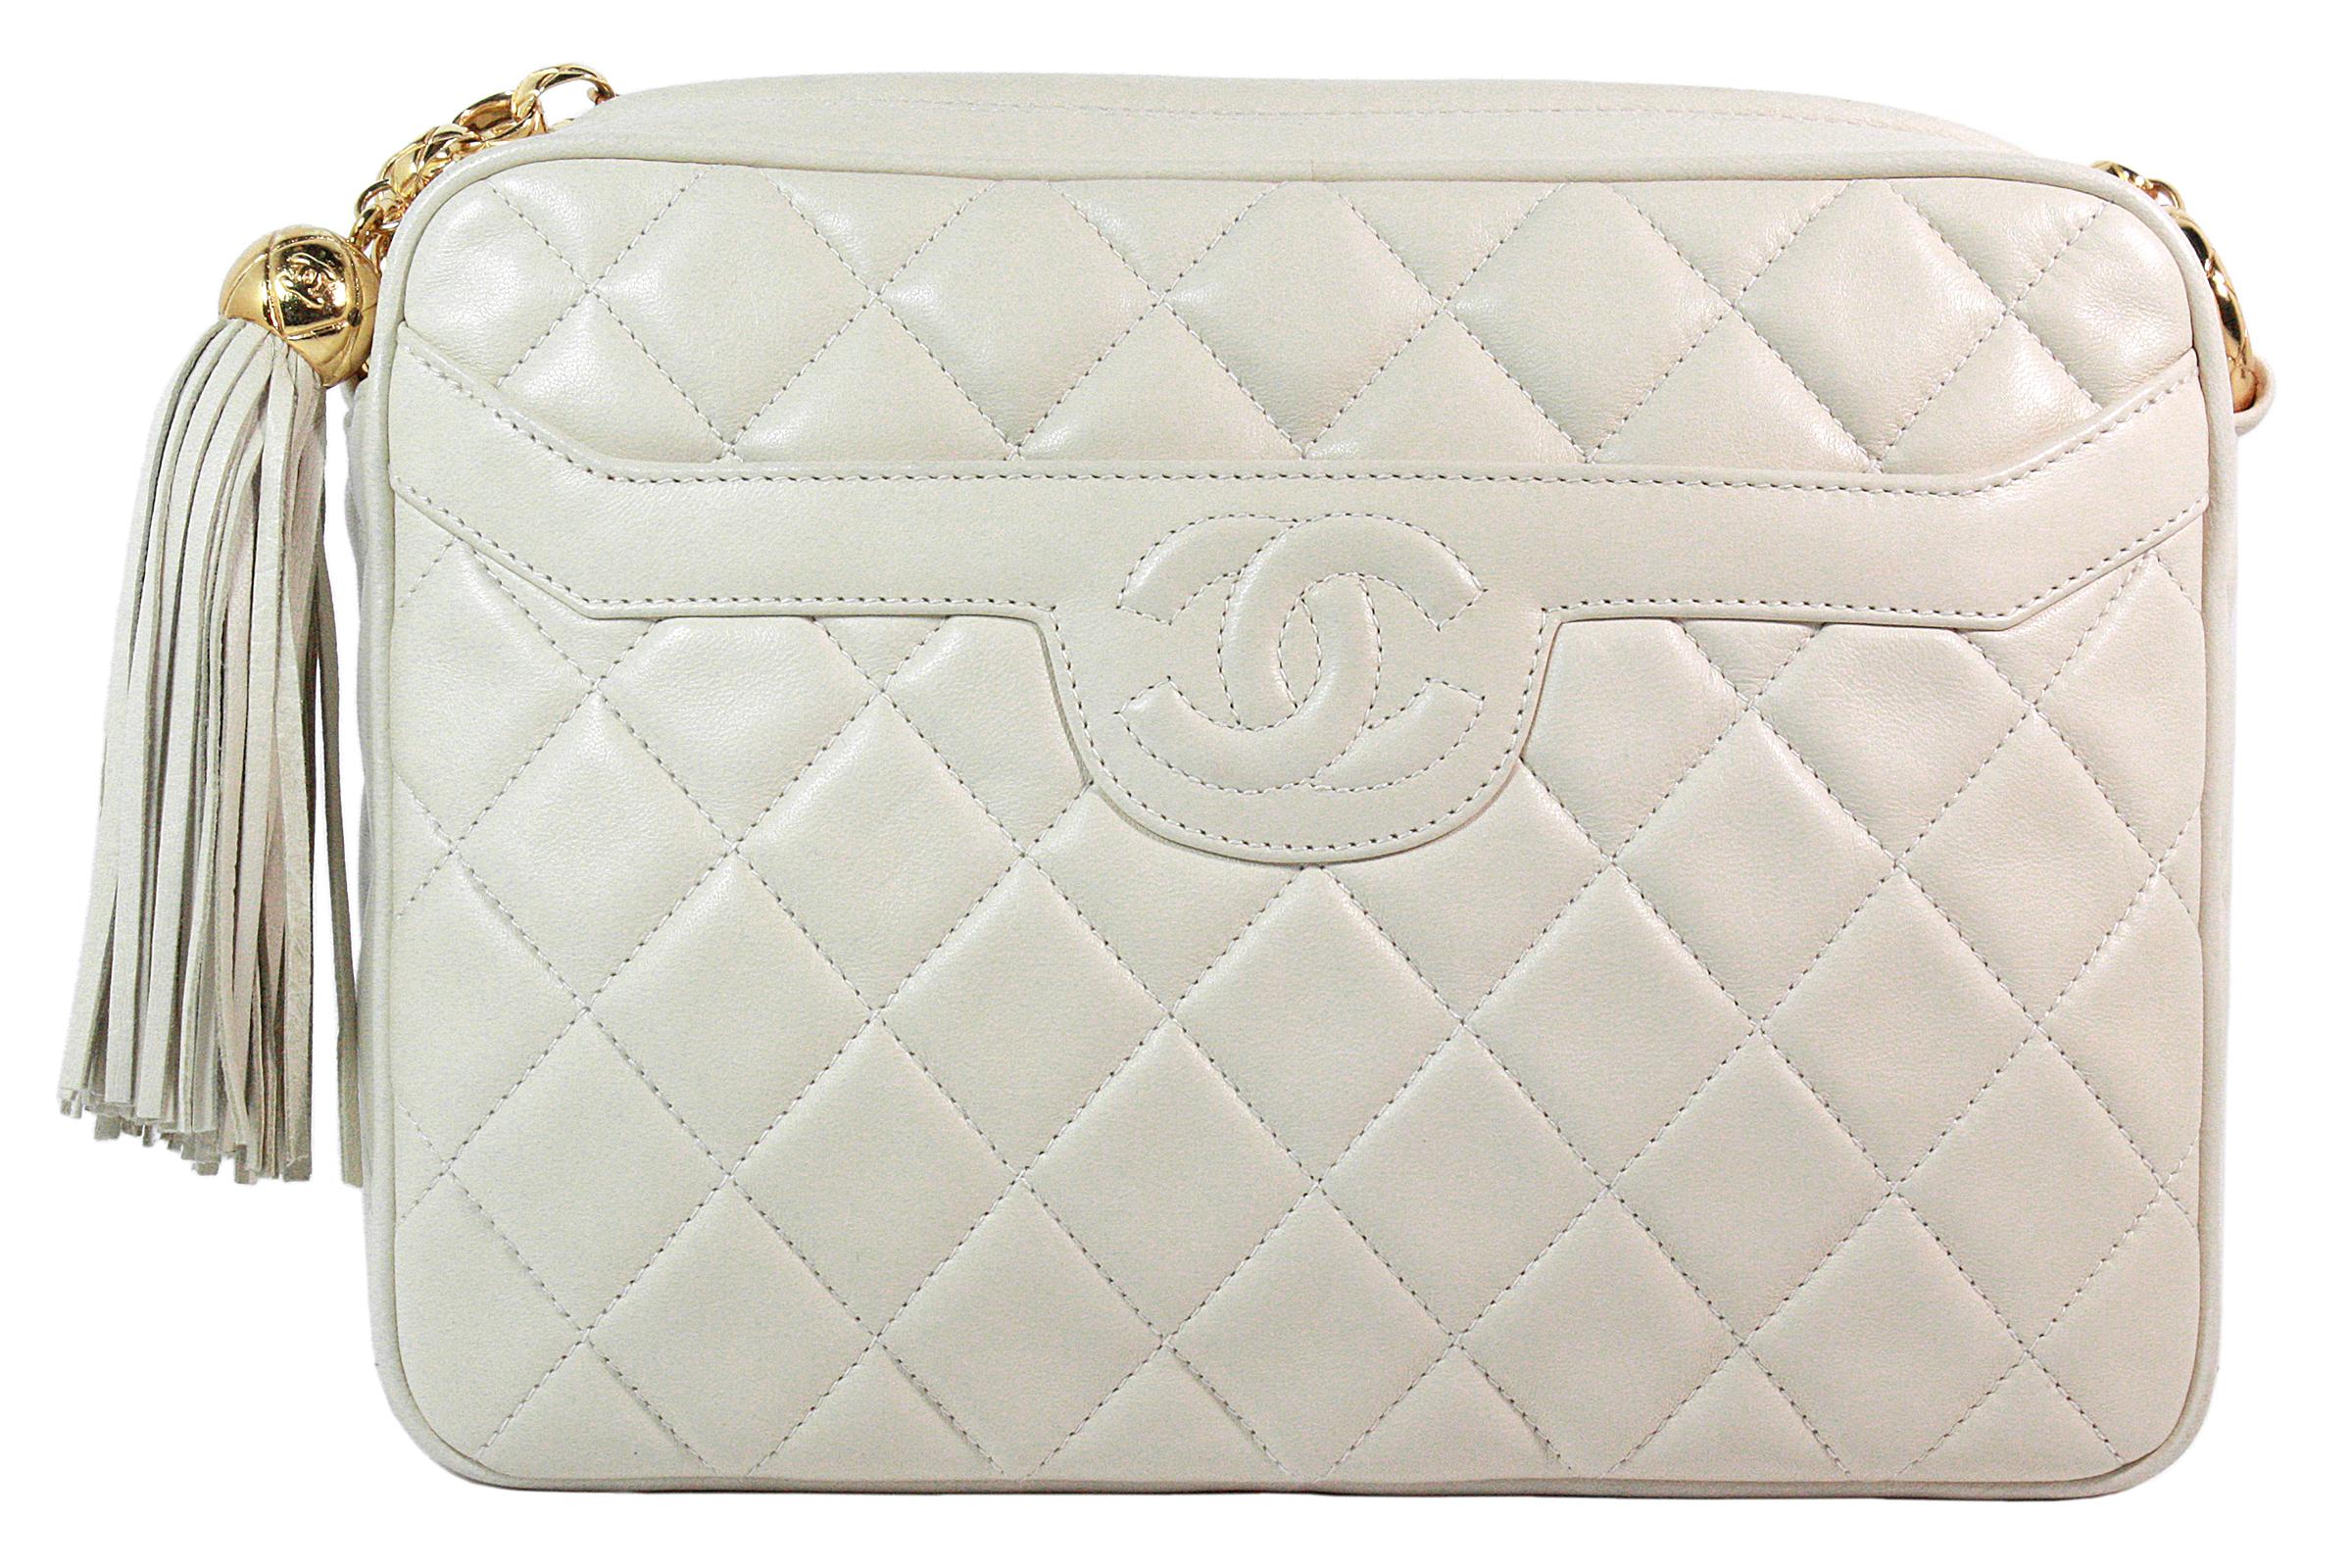 Chanel crossbody bag
Made in Italy
Soft cream quilted leather 
Stitched classic CC logo 
Front pocket 
Gold chain strap
Strap length: 44 inches 
Hanging gold ball and leather fringe detail 
Cream leather lining 
Interior zippered pocket 
Comes with